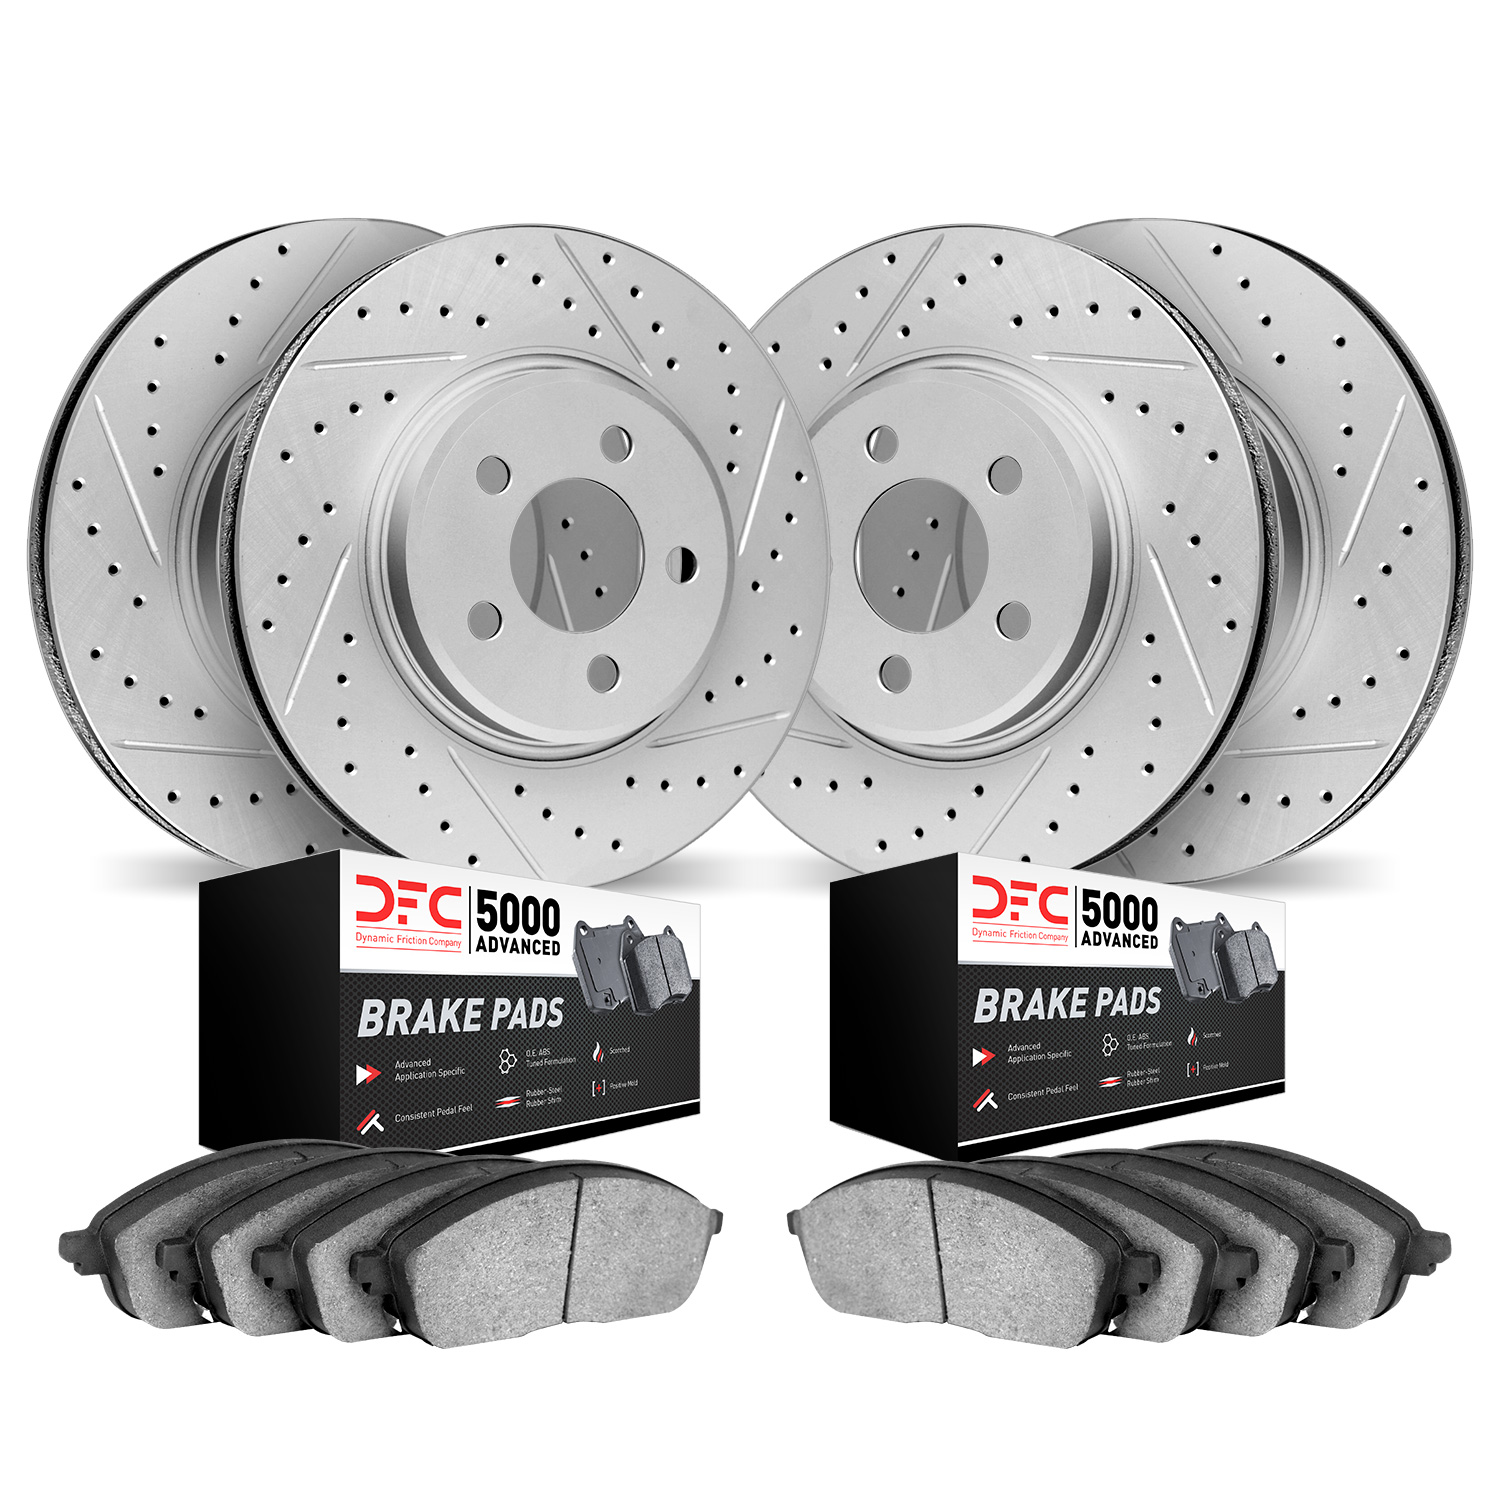 2504-13035 Geoperformance Drilled/Slotted Rotors w/5000 Advanced Brake Pads Kit, 2014-2018 Subaru, Position: Front and Rear